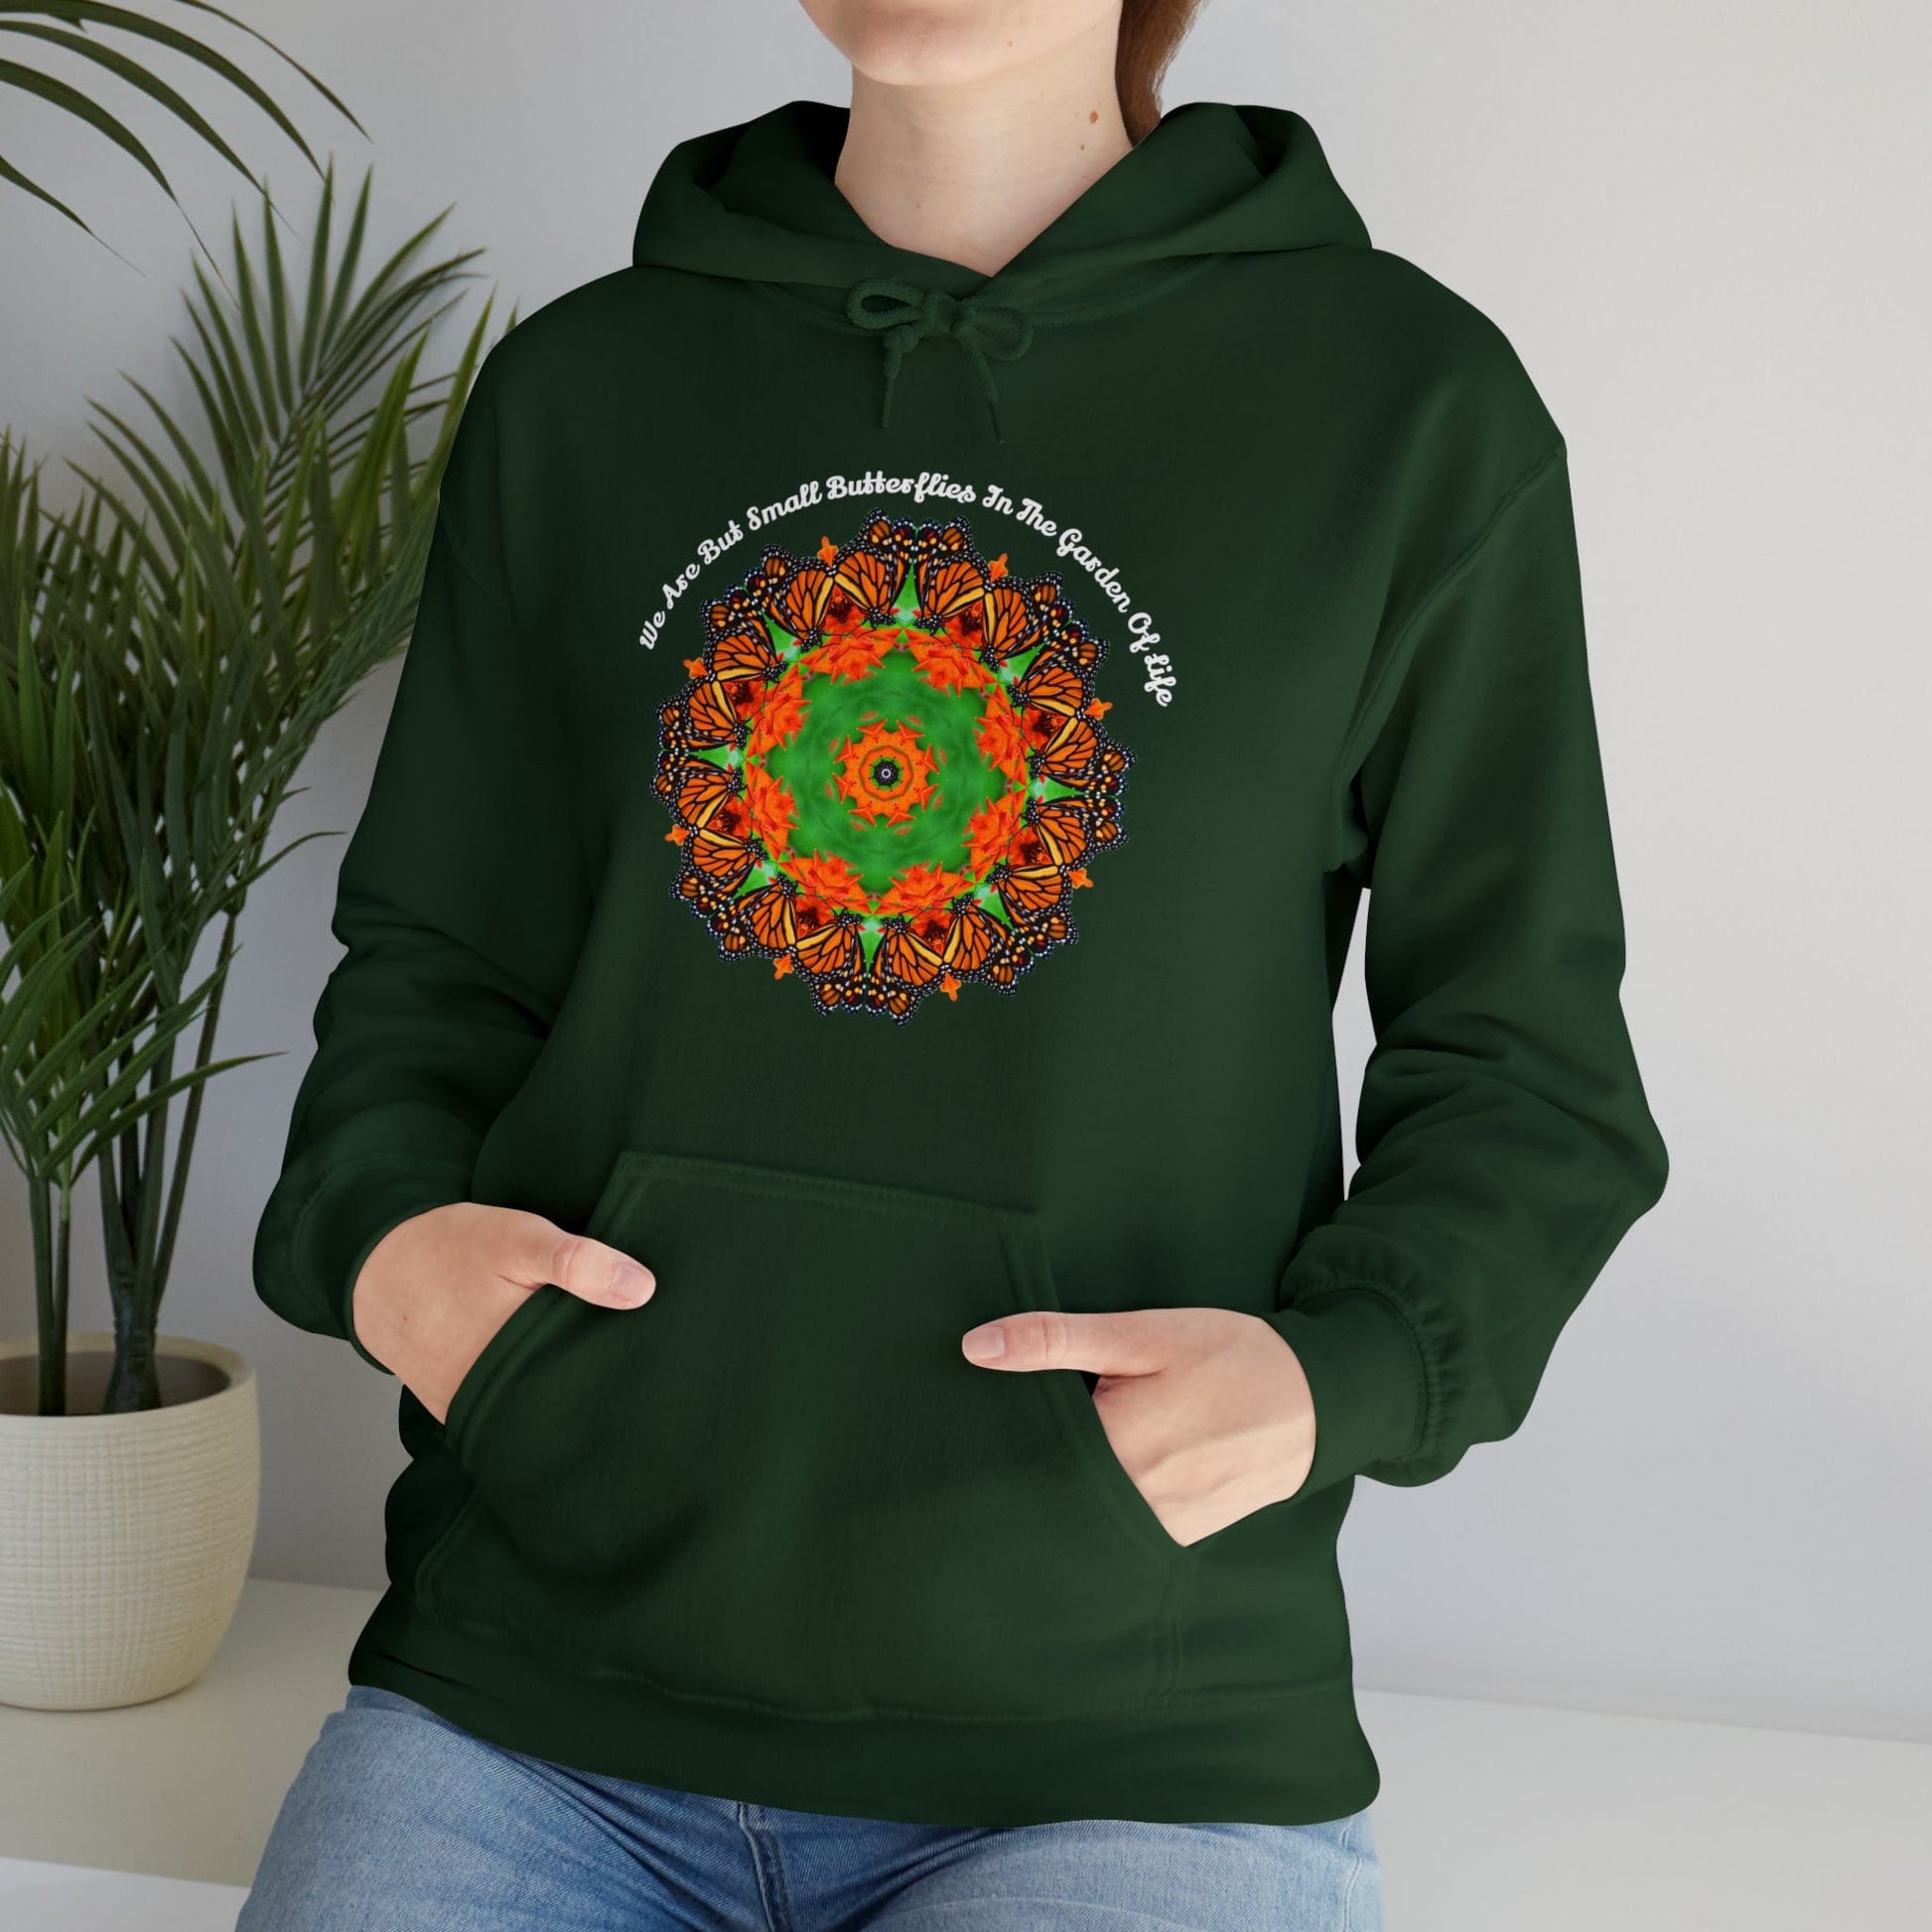 Pretty & Cute Butterfly Motivational Graphic Hoodie Sweatshirt Monarch Butterfly Mandala Art We Are But Small Butterflies In The Garden Of Life forest greem